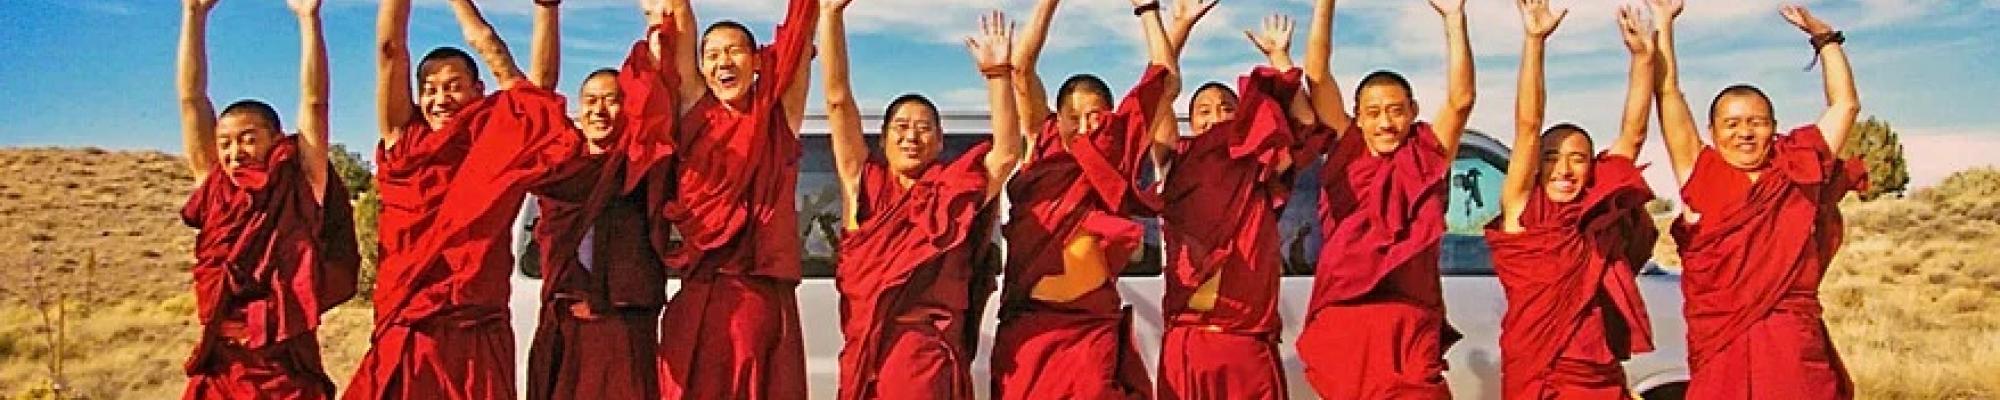 The Psychology of Enlightenment with Tibetan Monks